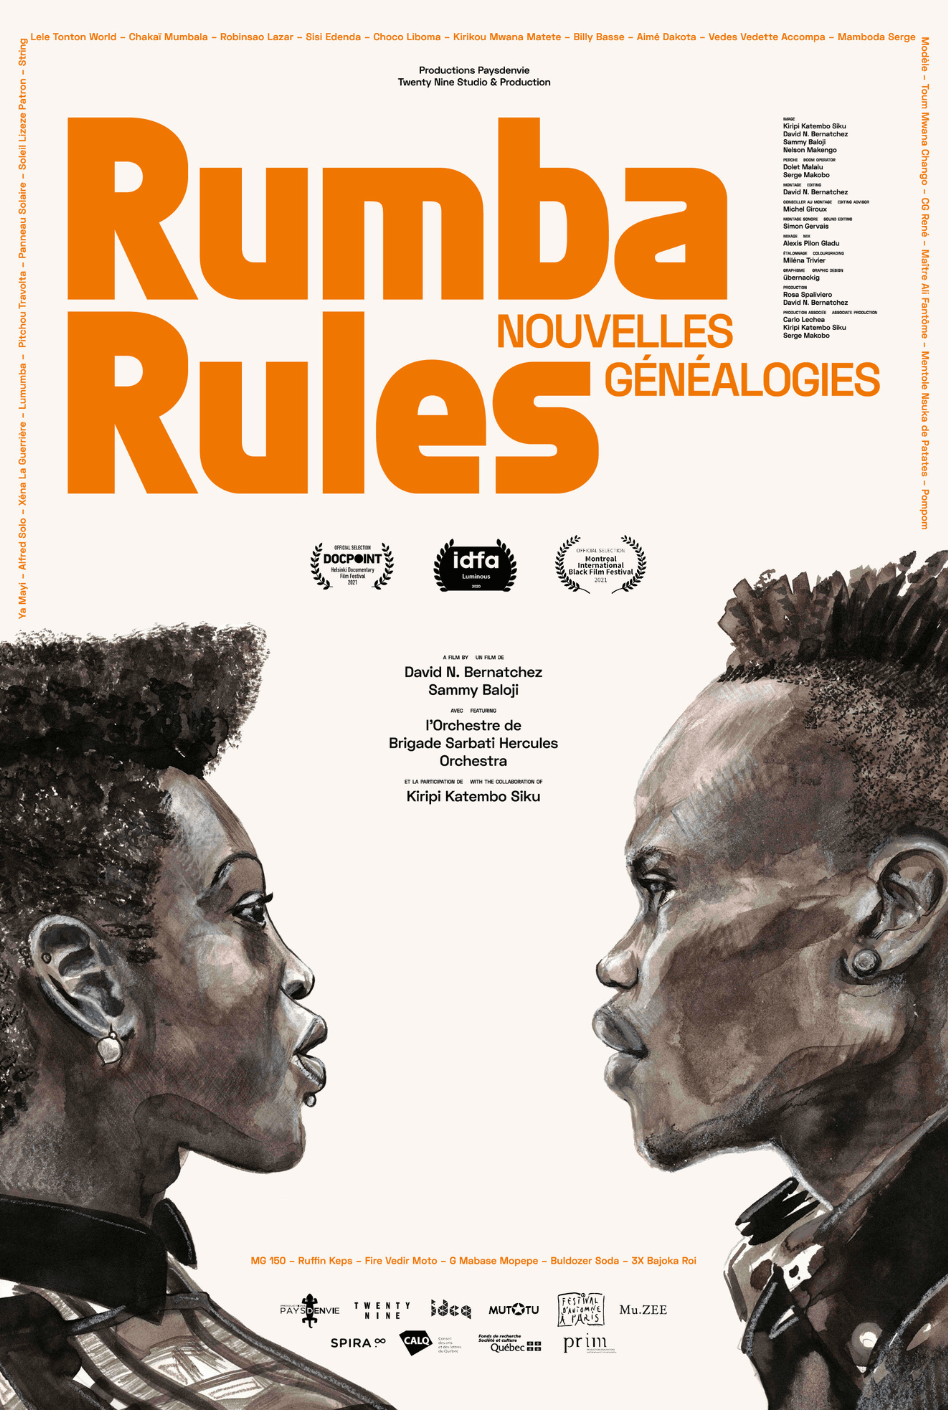 images/bottin_films/6495ba35ecda22d5723986c5d53ae2e7-Rumba-Rules-affiche-poster.png#joomlaImage://local-images/bottin_films/6495ba35ecda22d5723986c5d53ae2e7-Rumba-Rules-affiche-poster.png?width=948&height=1410